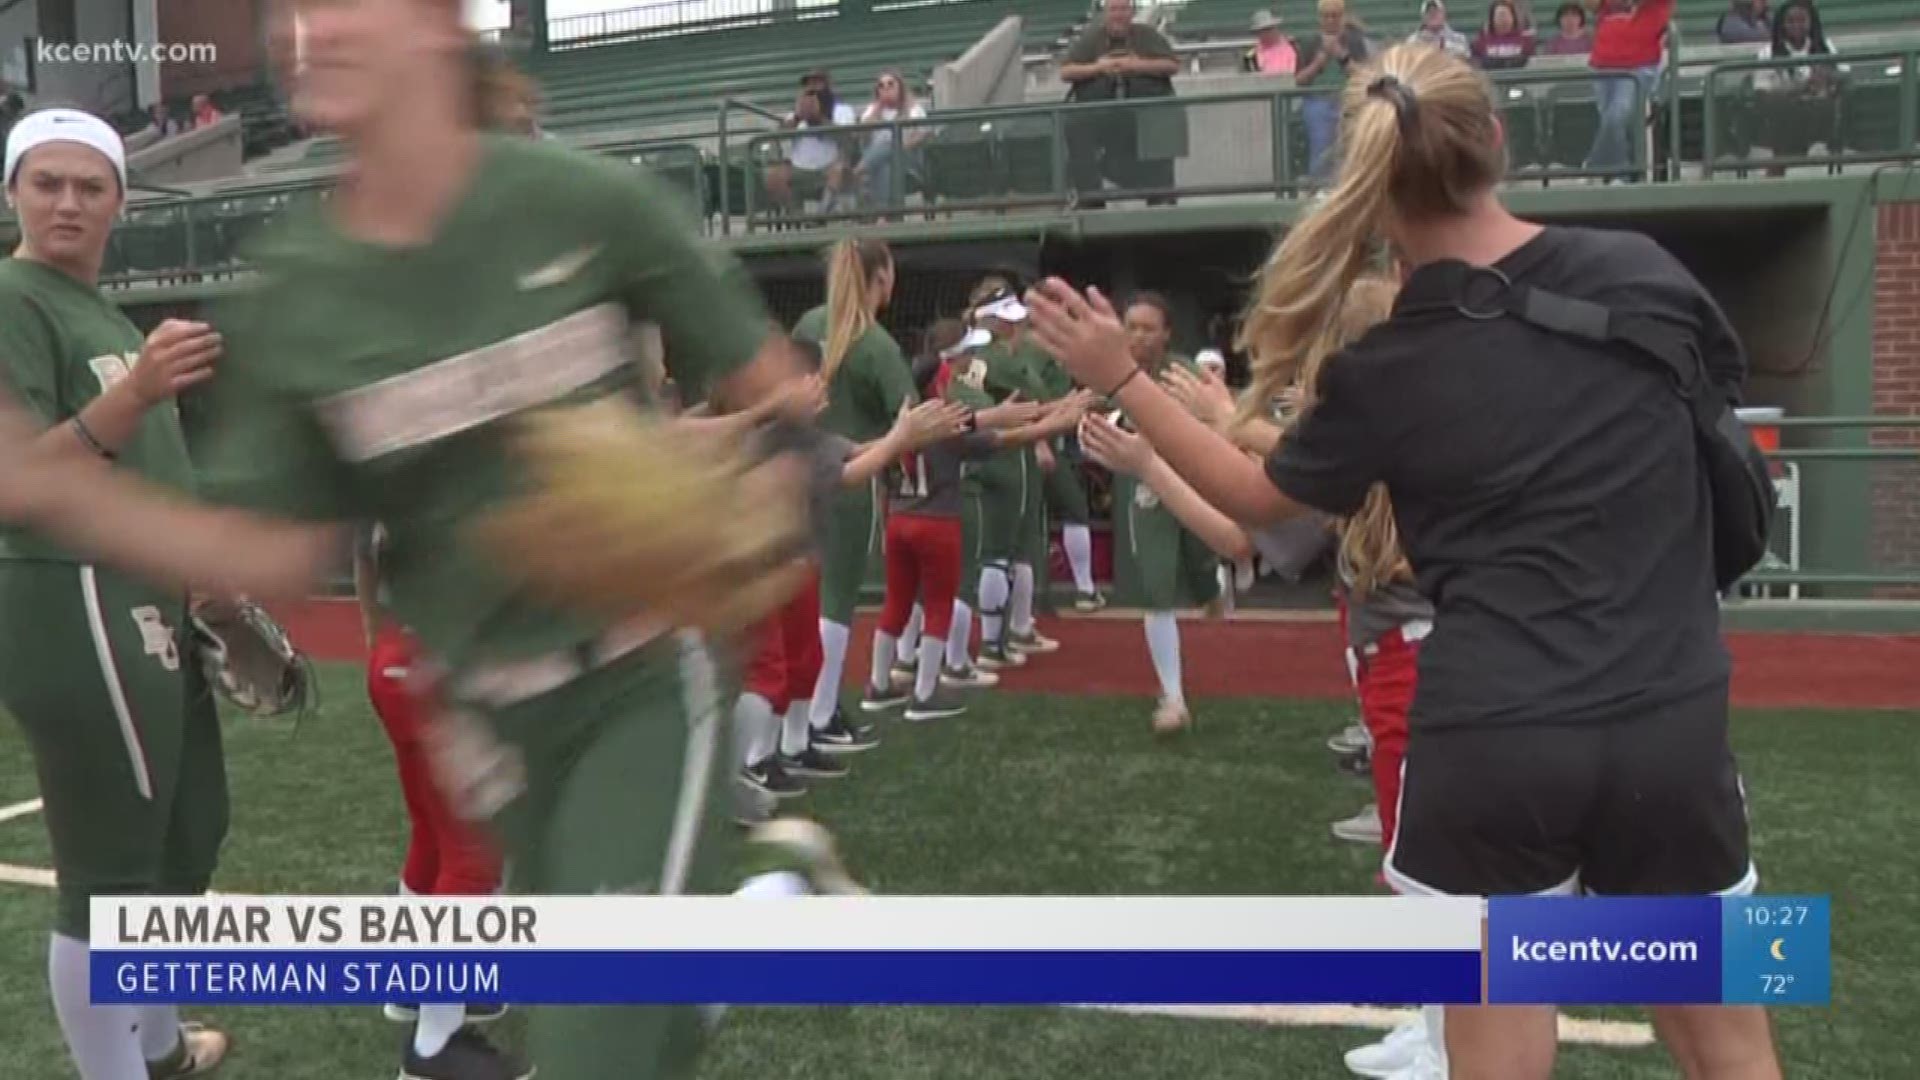 Baylor Softball got the dub in both games, winning 6-0 and 2-0.